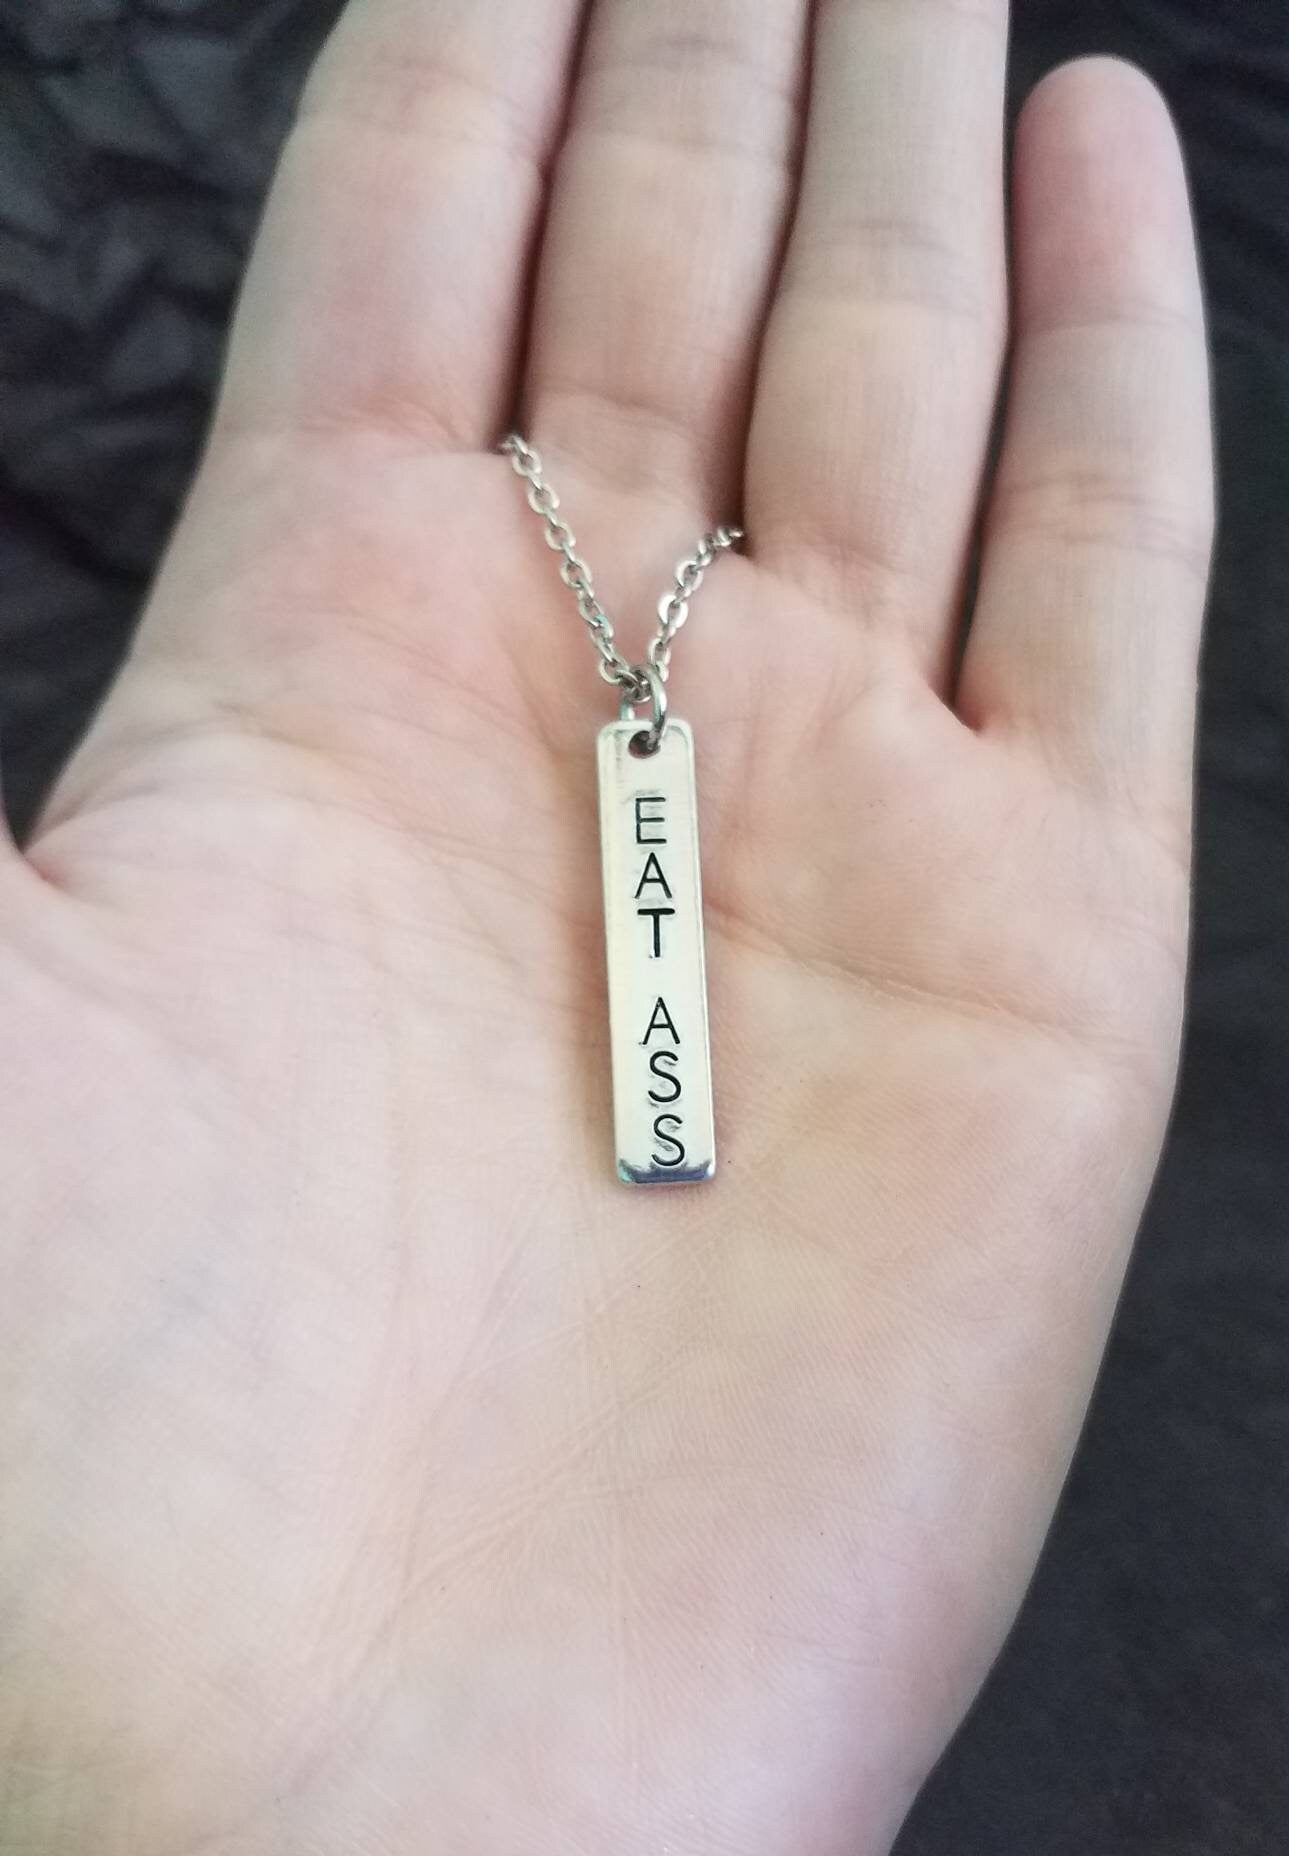 Eat Ass Hand stamped Pendant Necklace